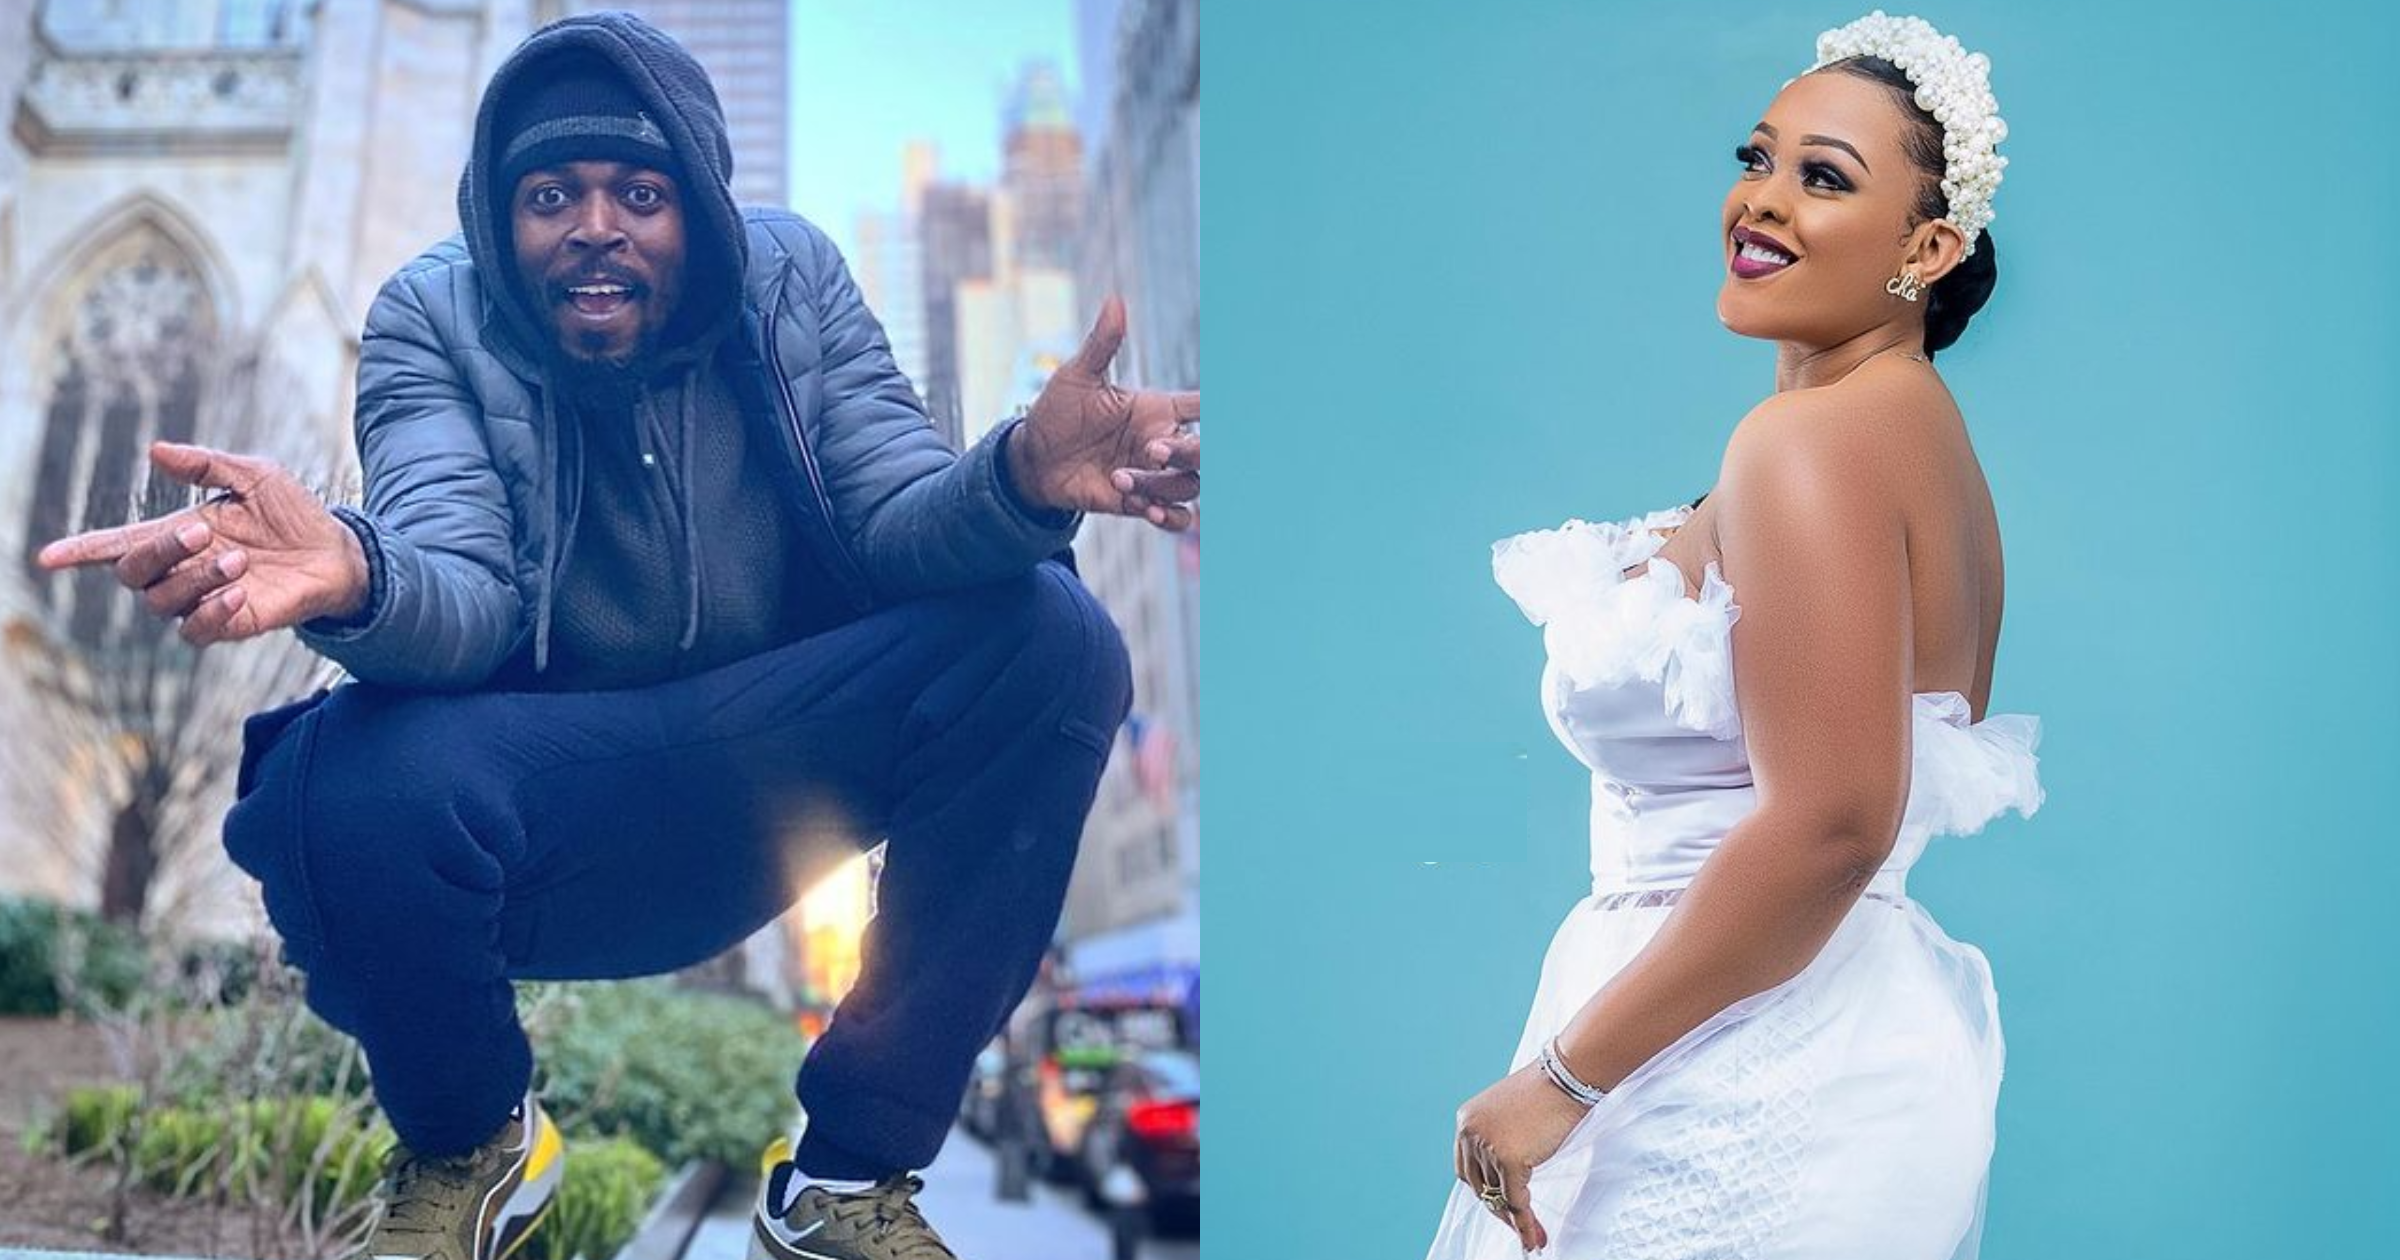 Kwaw Kese gushes as his beautiful wife shows off her fine skin in a mini-dress in new photo